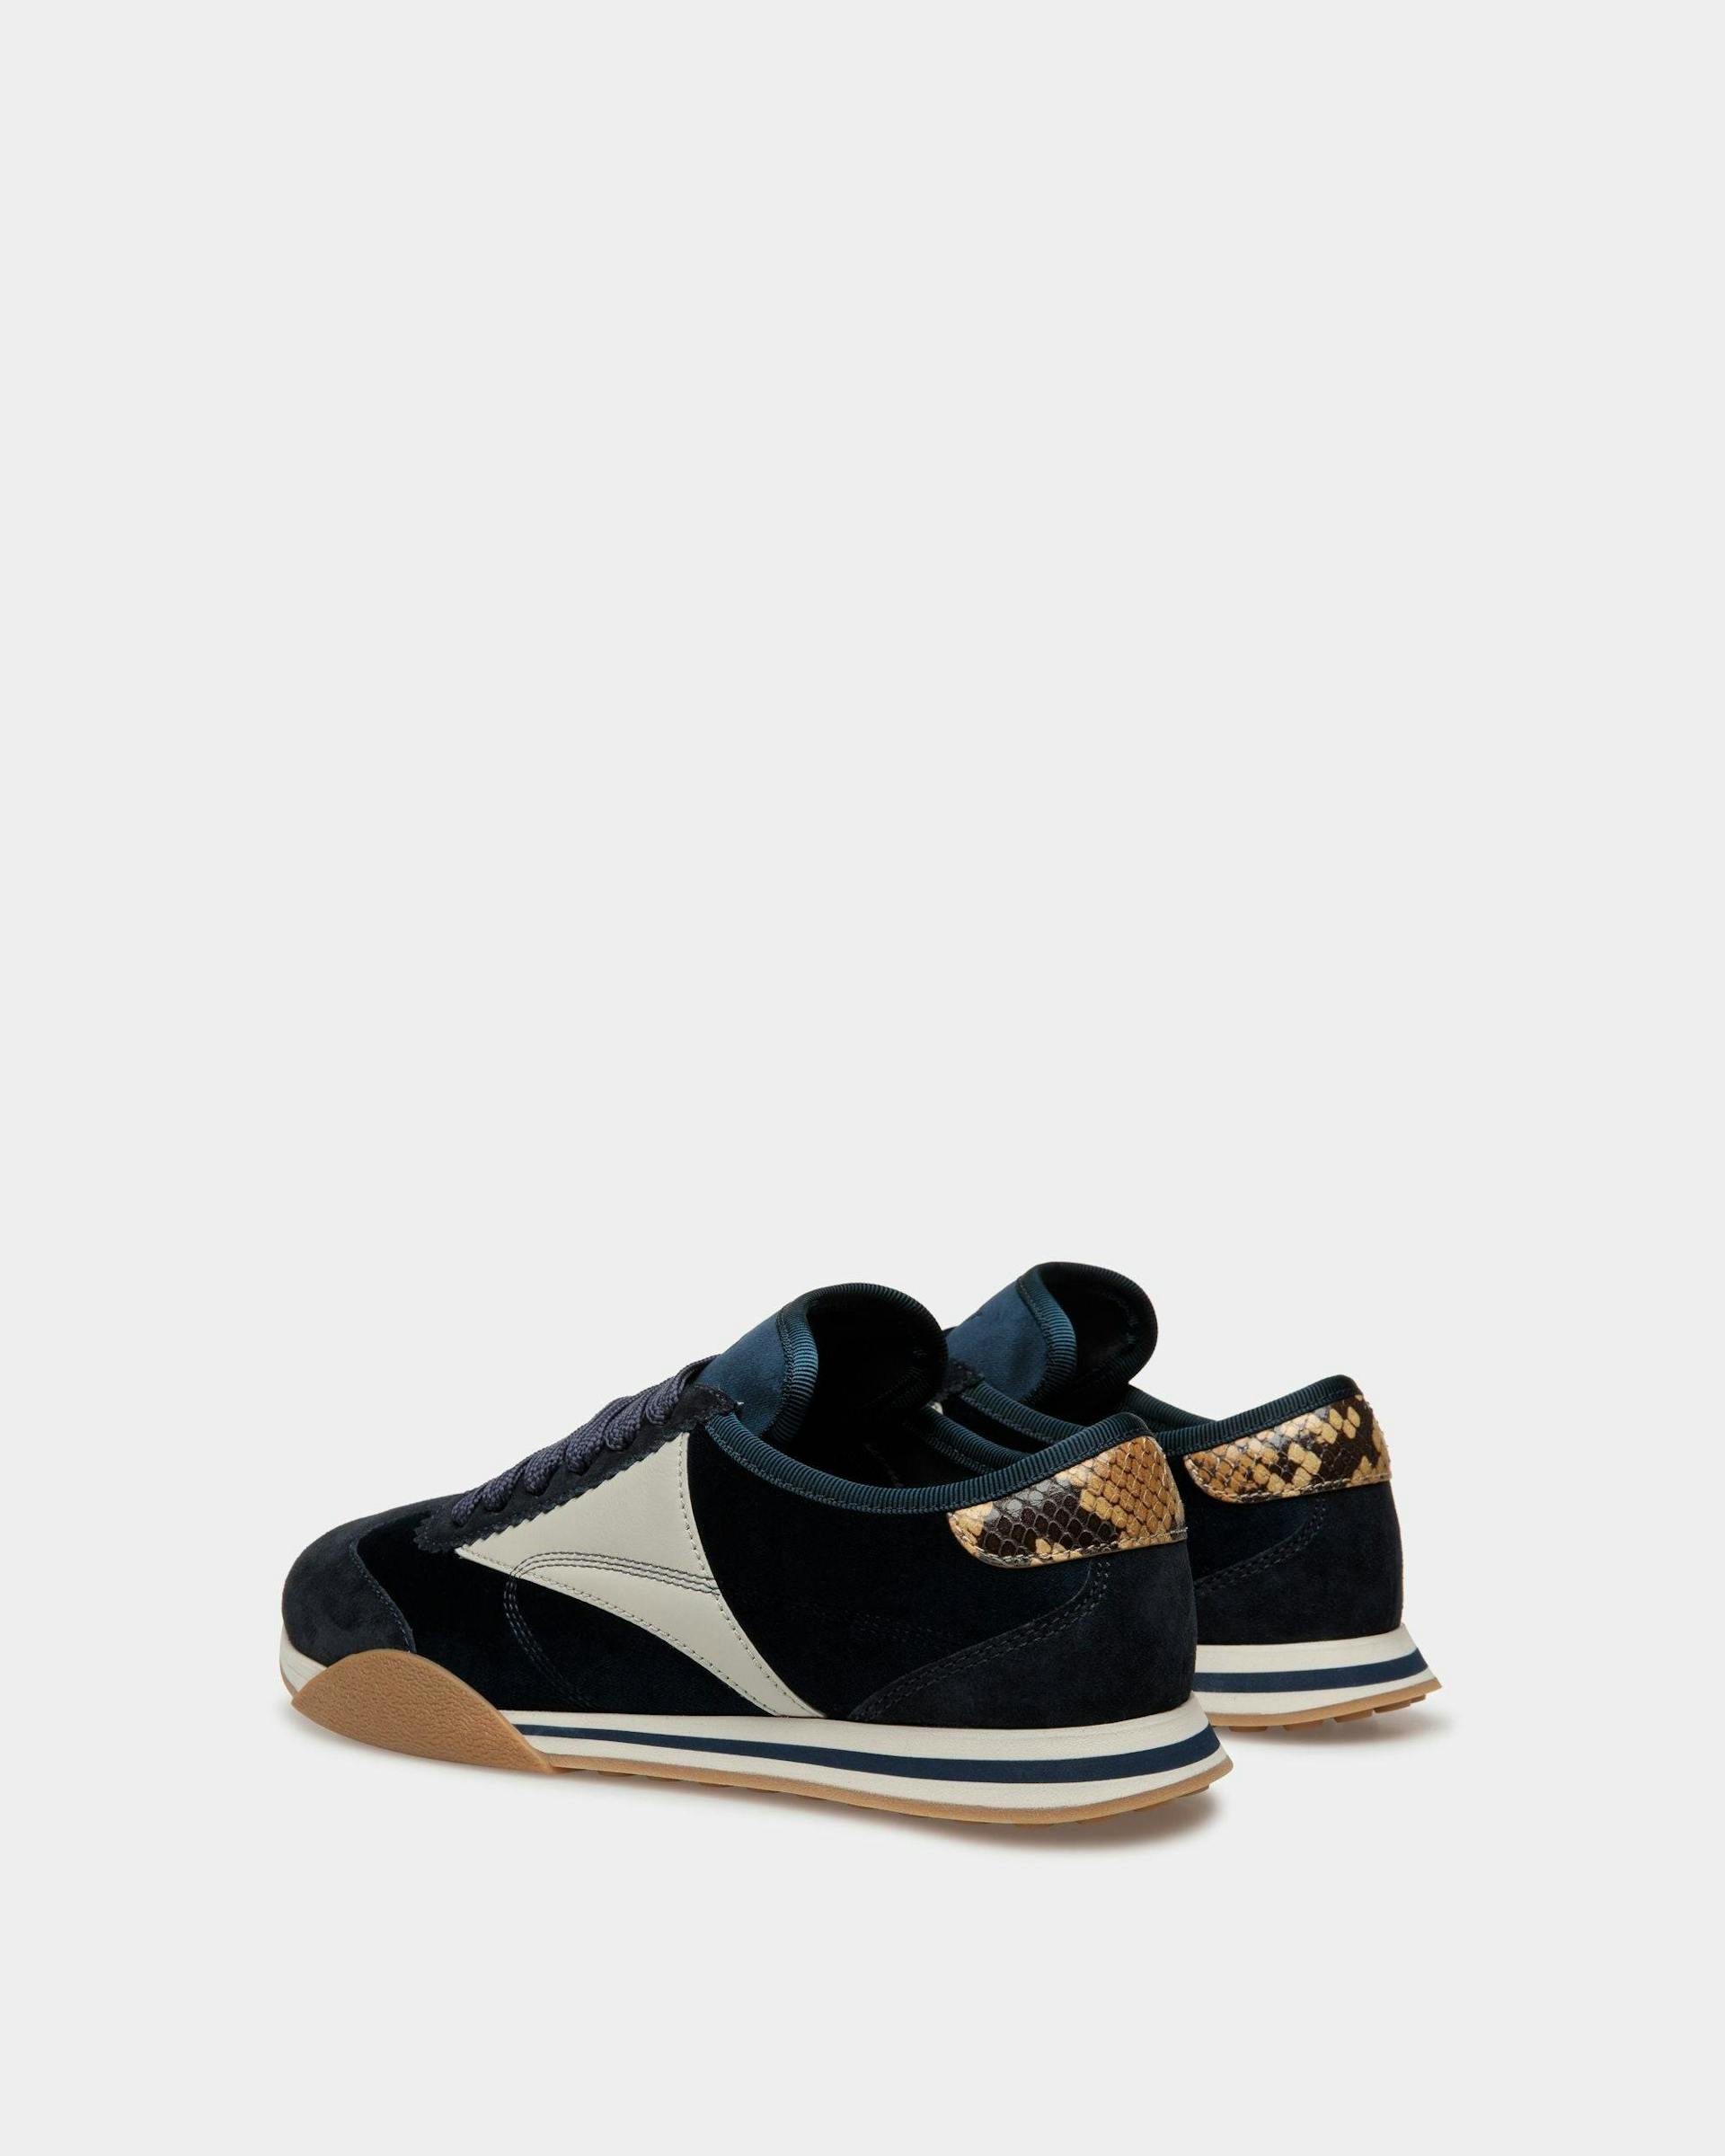 Sussex Sneakers In Midnight And Dusty White Leather And Cotton - Women's - Bally - 03